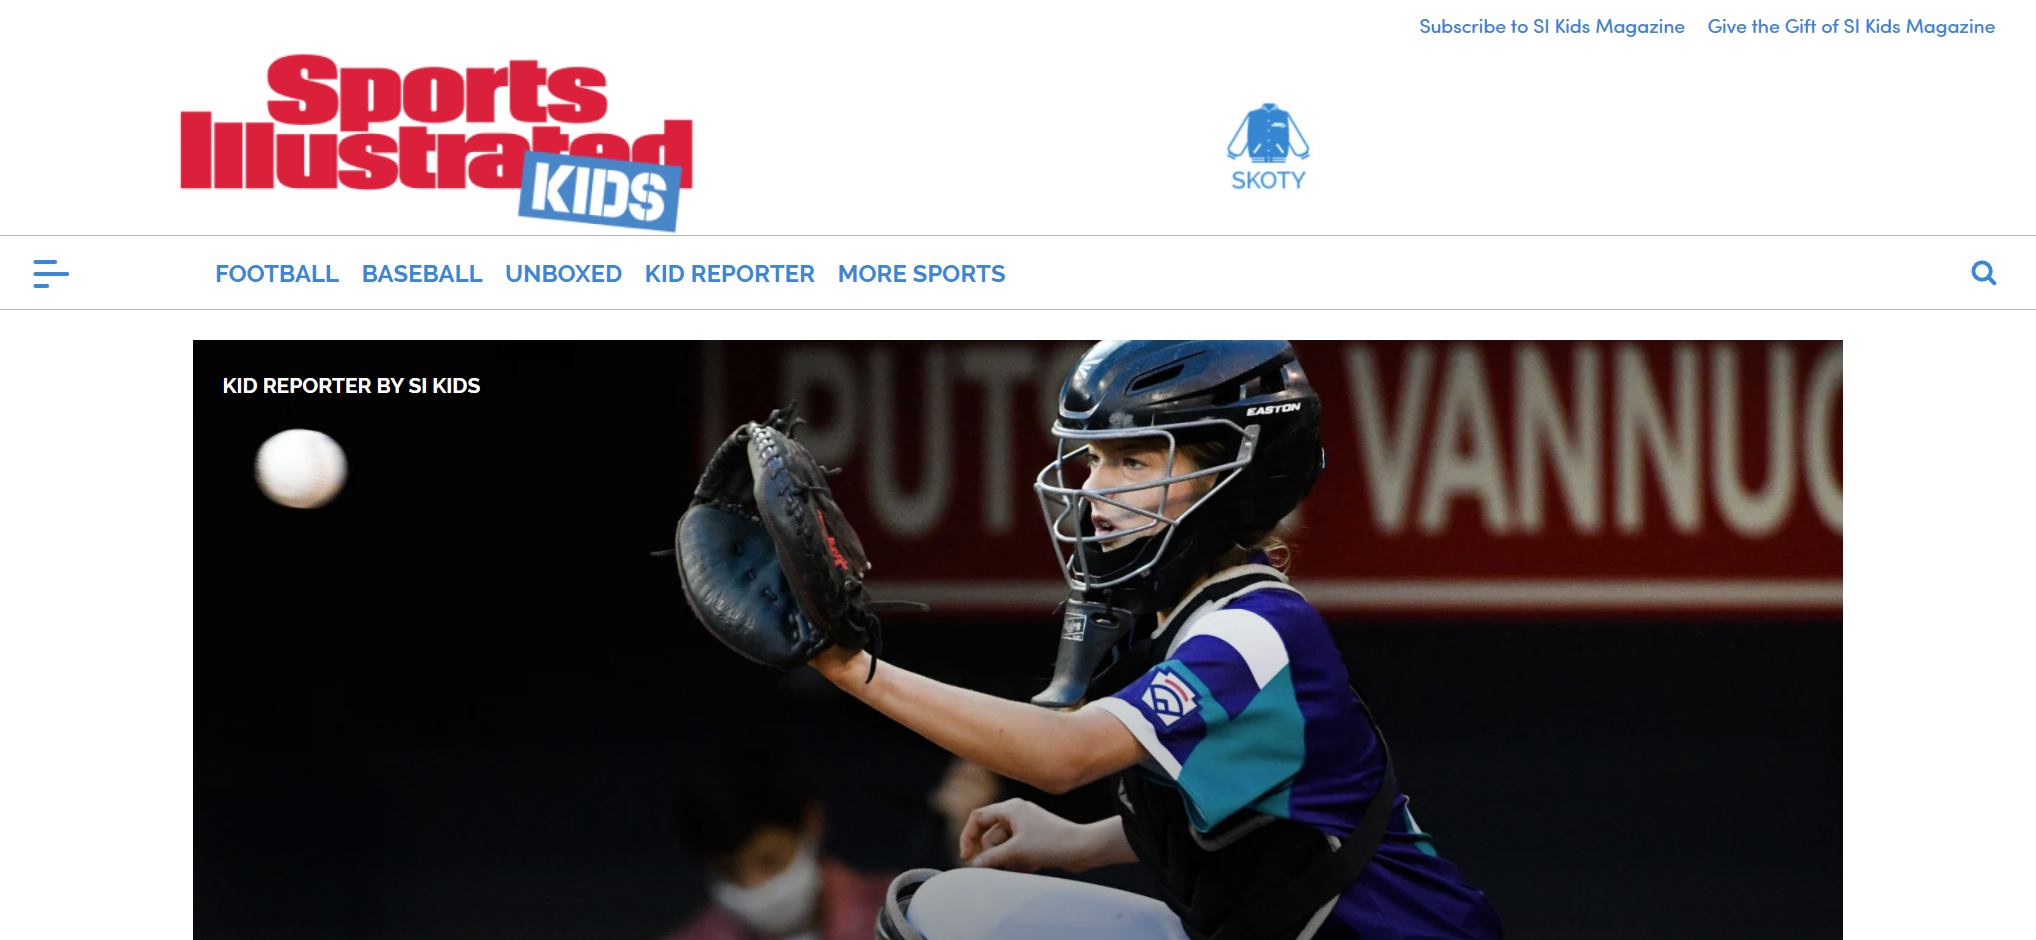 The Sports Illustrated Kids homepage.